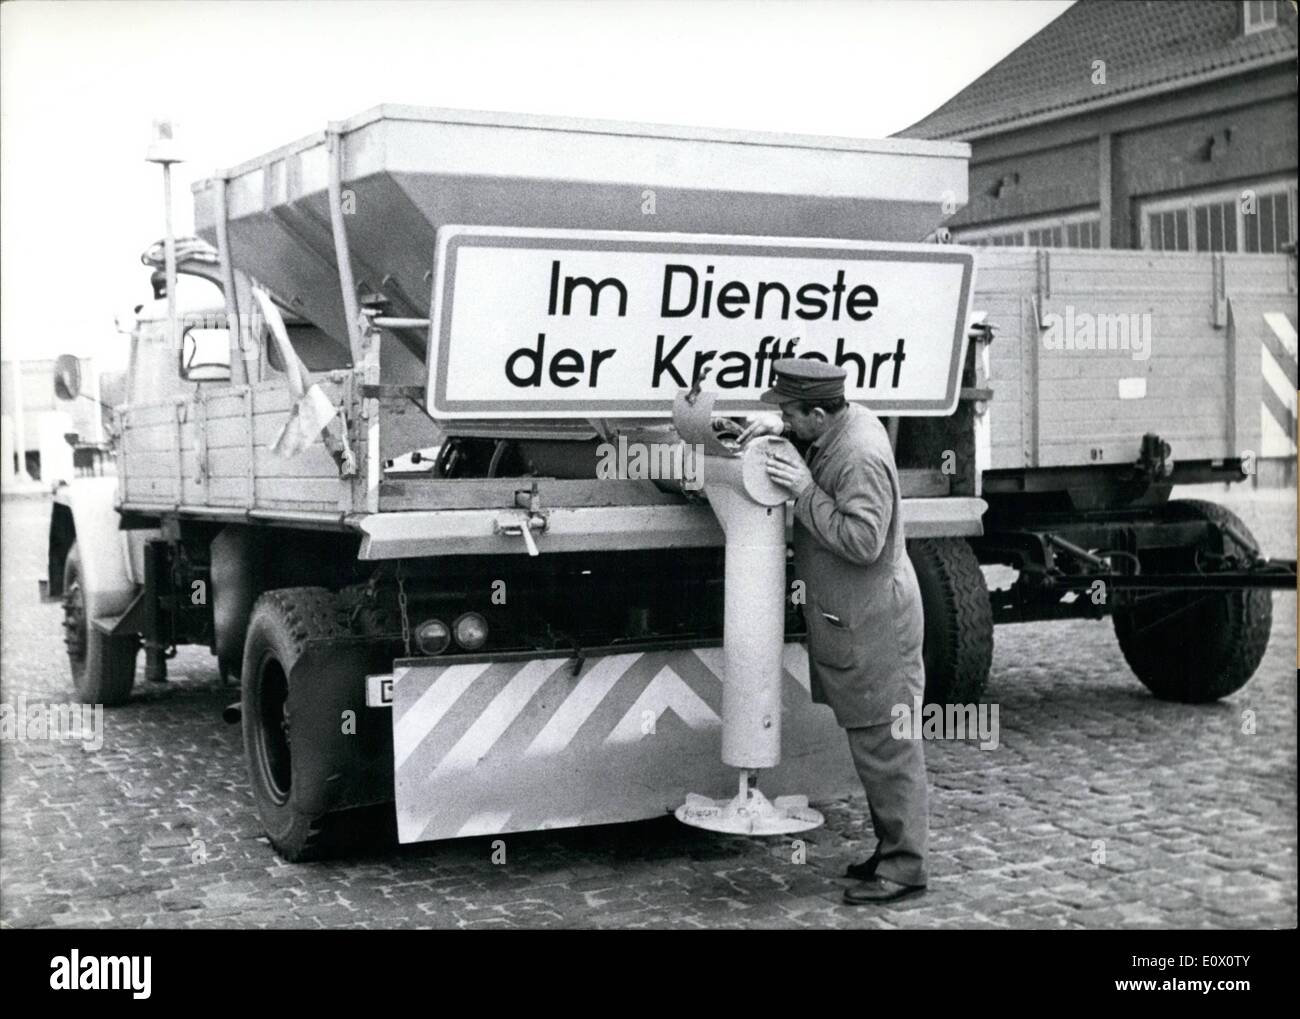 Nov. 11, 1964 - Reday for snow and ice are the special vehicles of the german autobahn conroll offices, The Vehicles bear big signs saying ''At traffic's service'' to warn reckless drivers which pass these cars in dangerous ways. Stock Photo